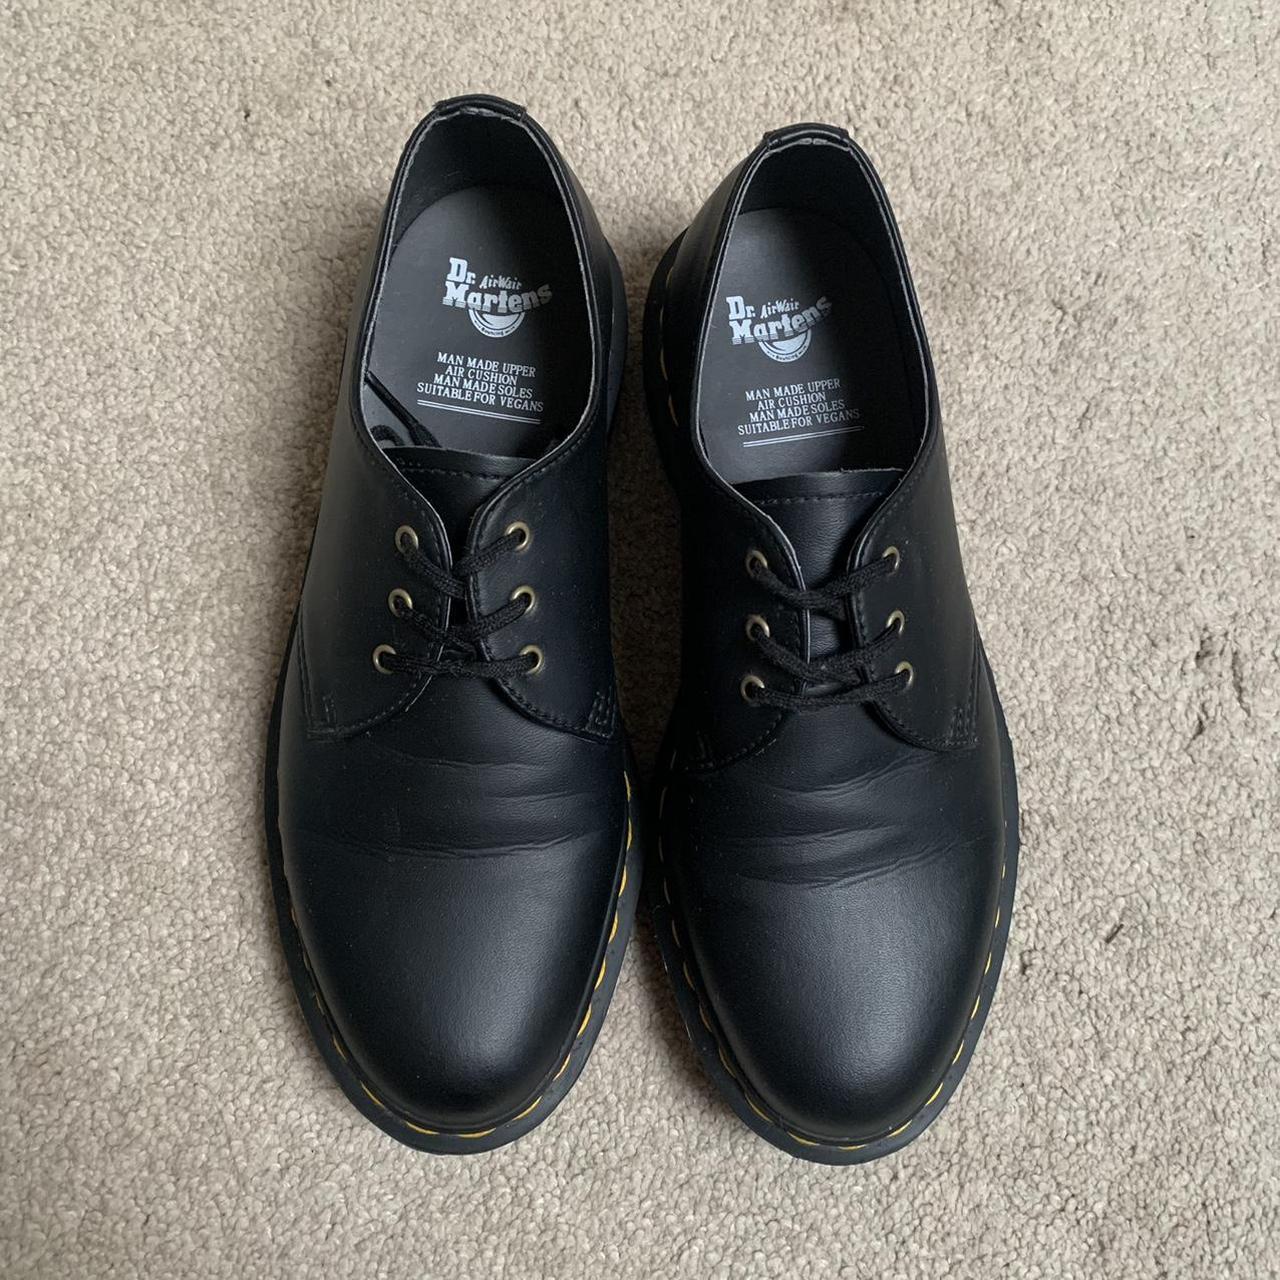 Dr Martens vegan 1461 shoes. Only worn to try on,... - Depop